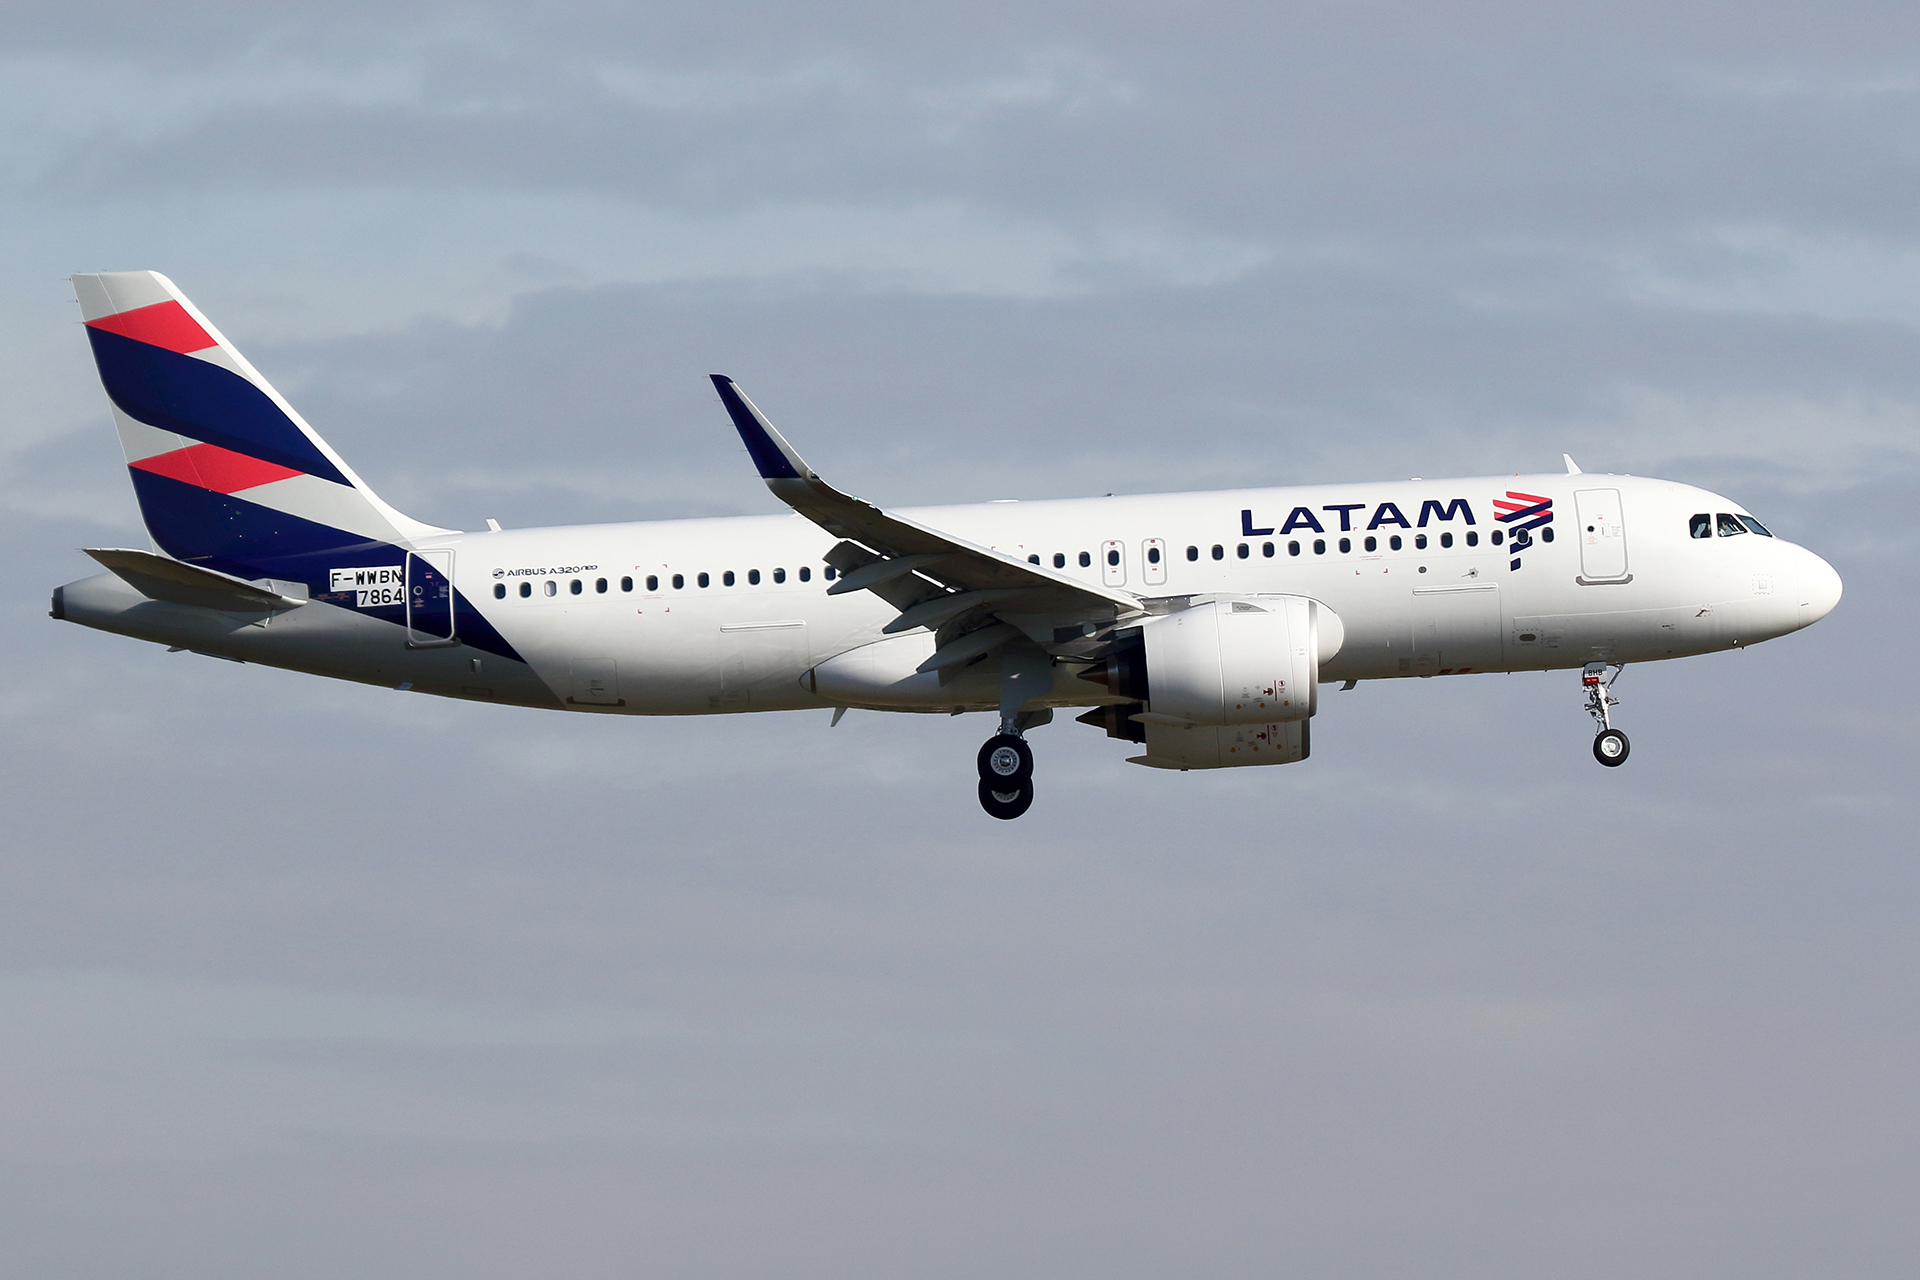 Latam Airlines - Airbus A320 neo